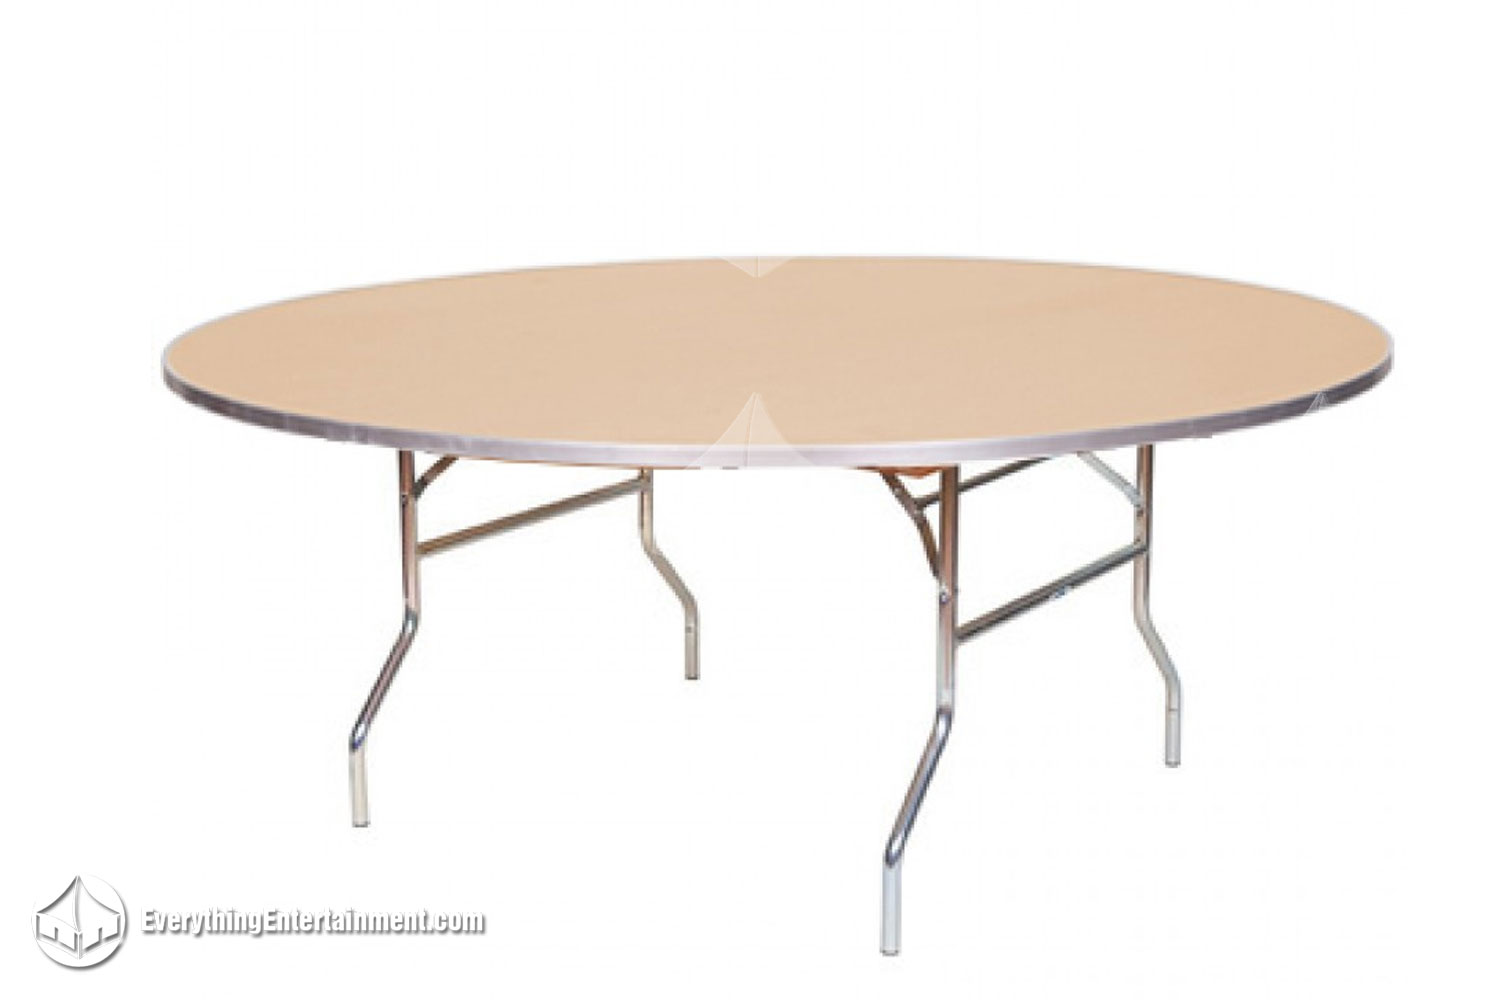 A 72 inch round table on white background